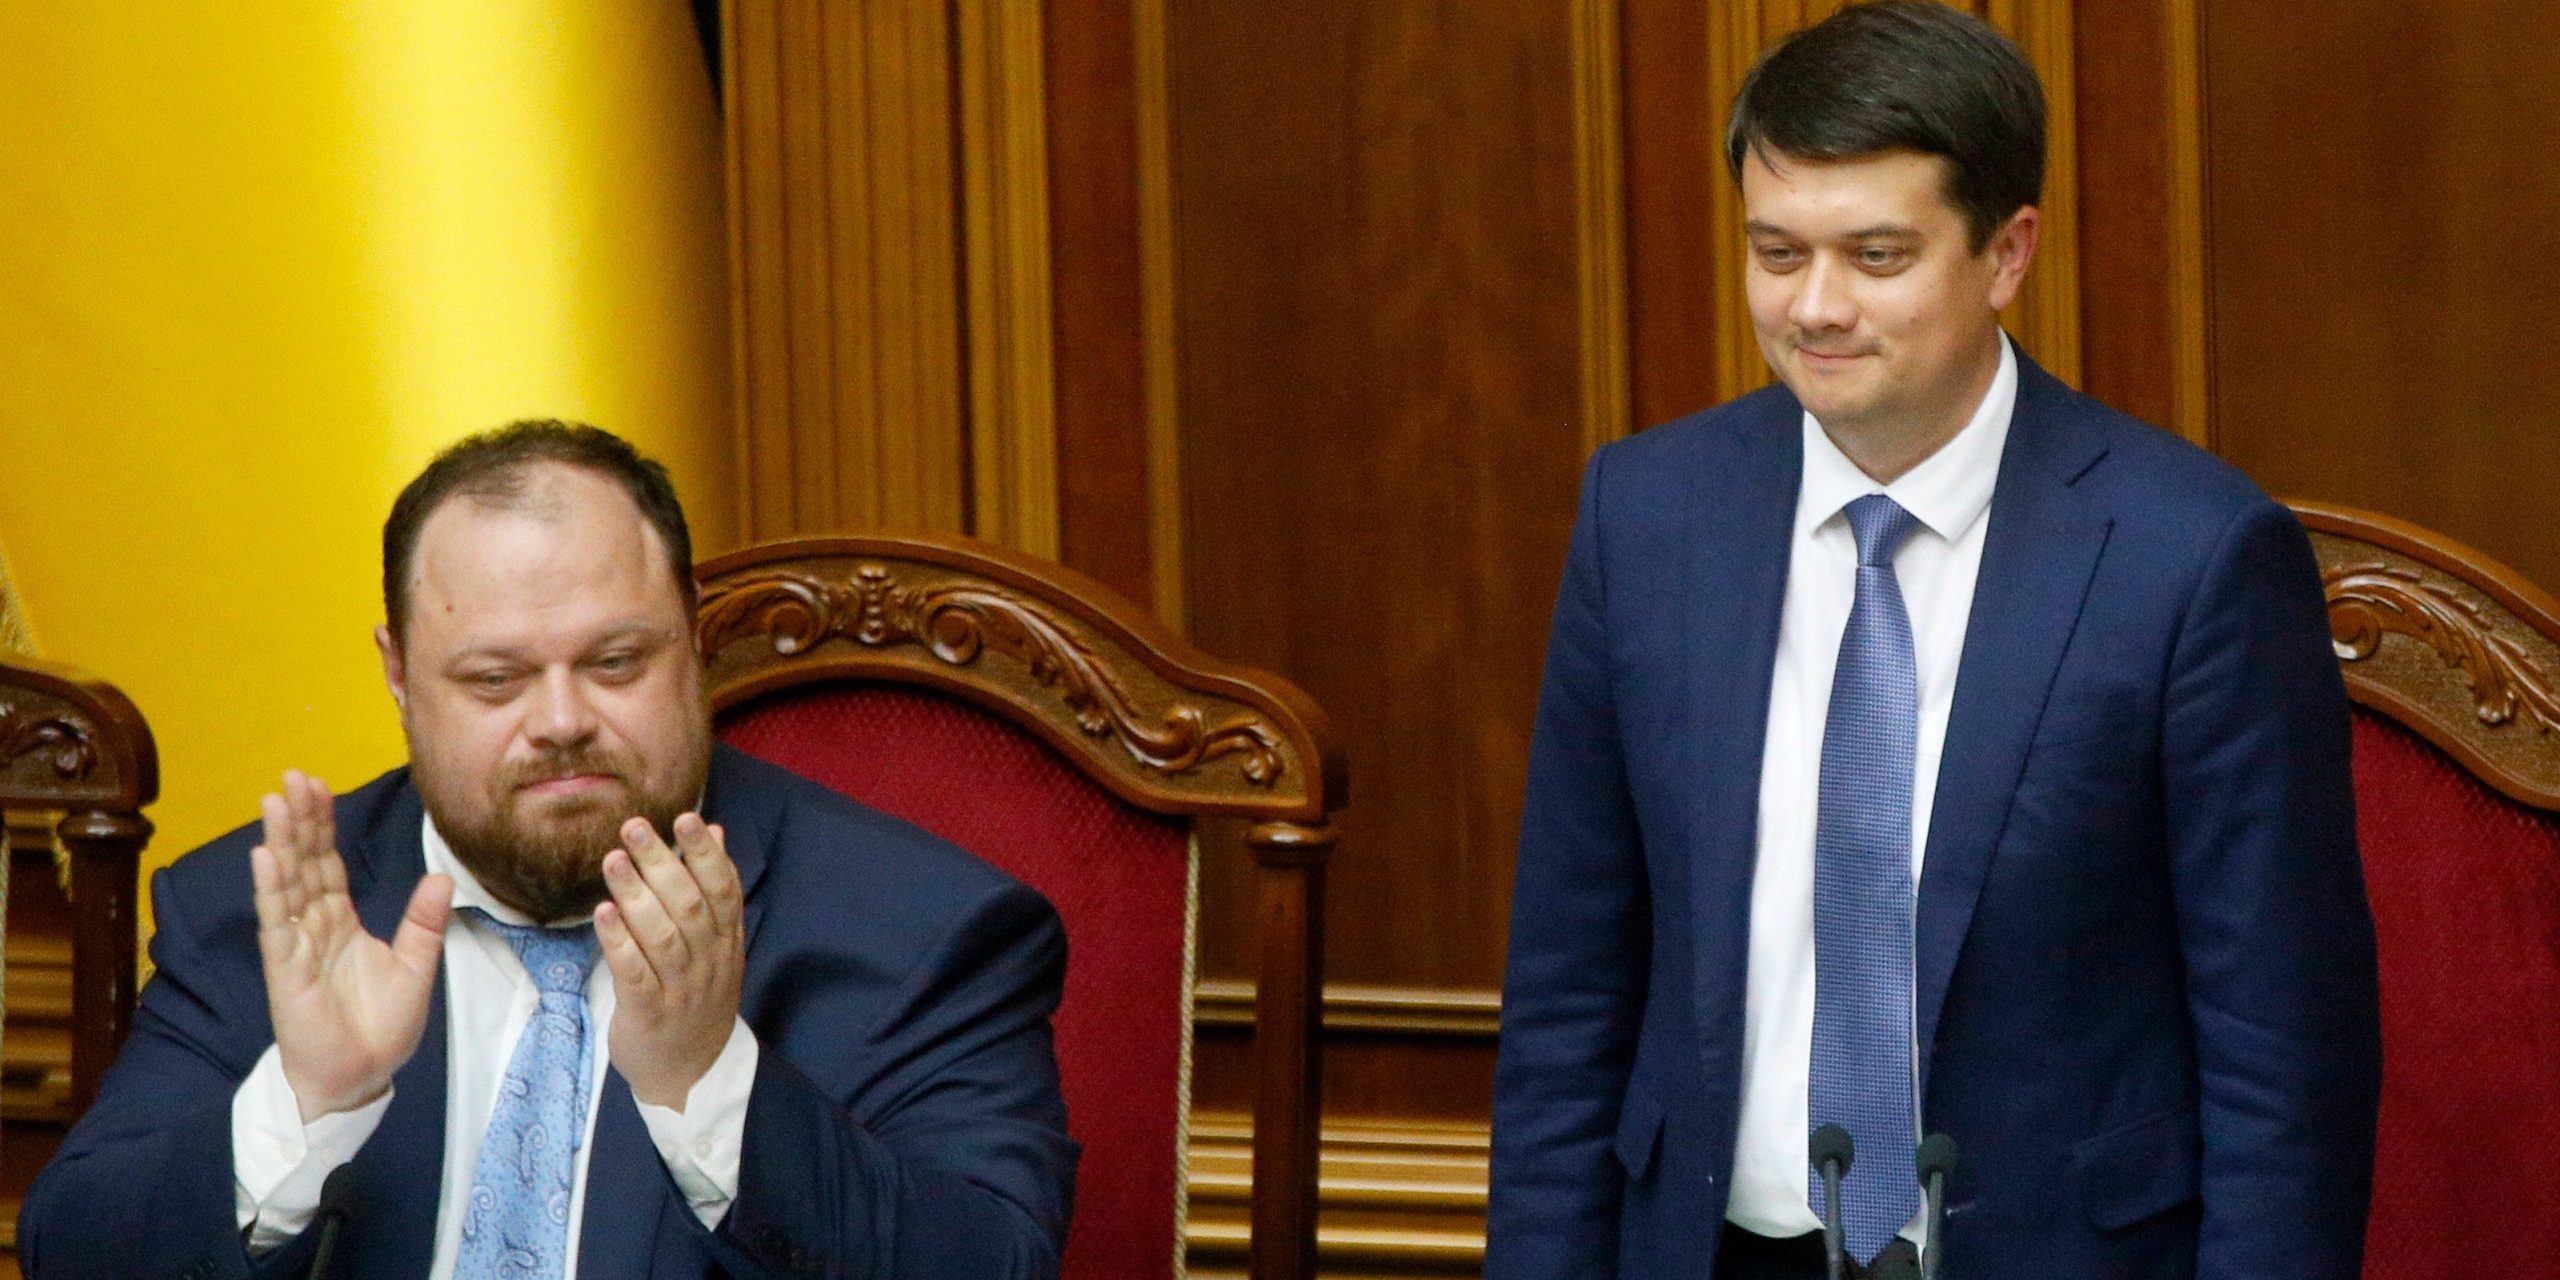 In this Aug. 29, 2019 photo, Dmytro Razumkov (RIGHT) and Ruslan Stefanchuk (LEFT) attend a parliament session in Kyiv, Ukraine.